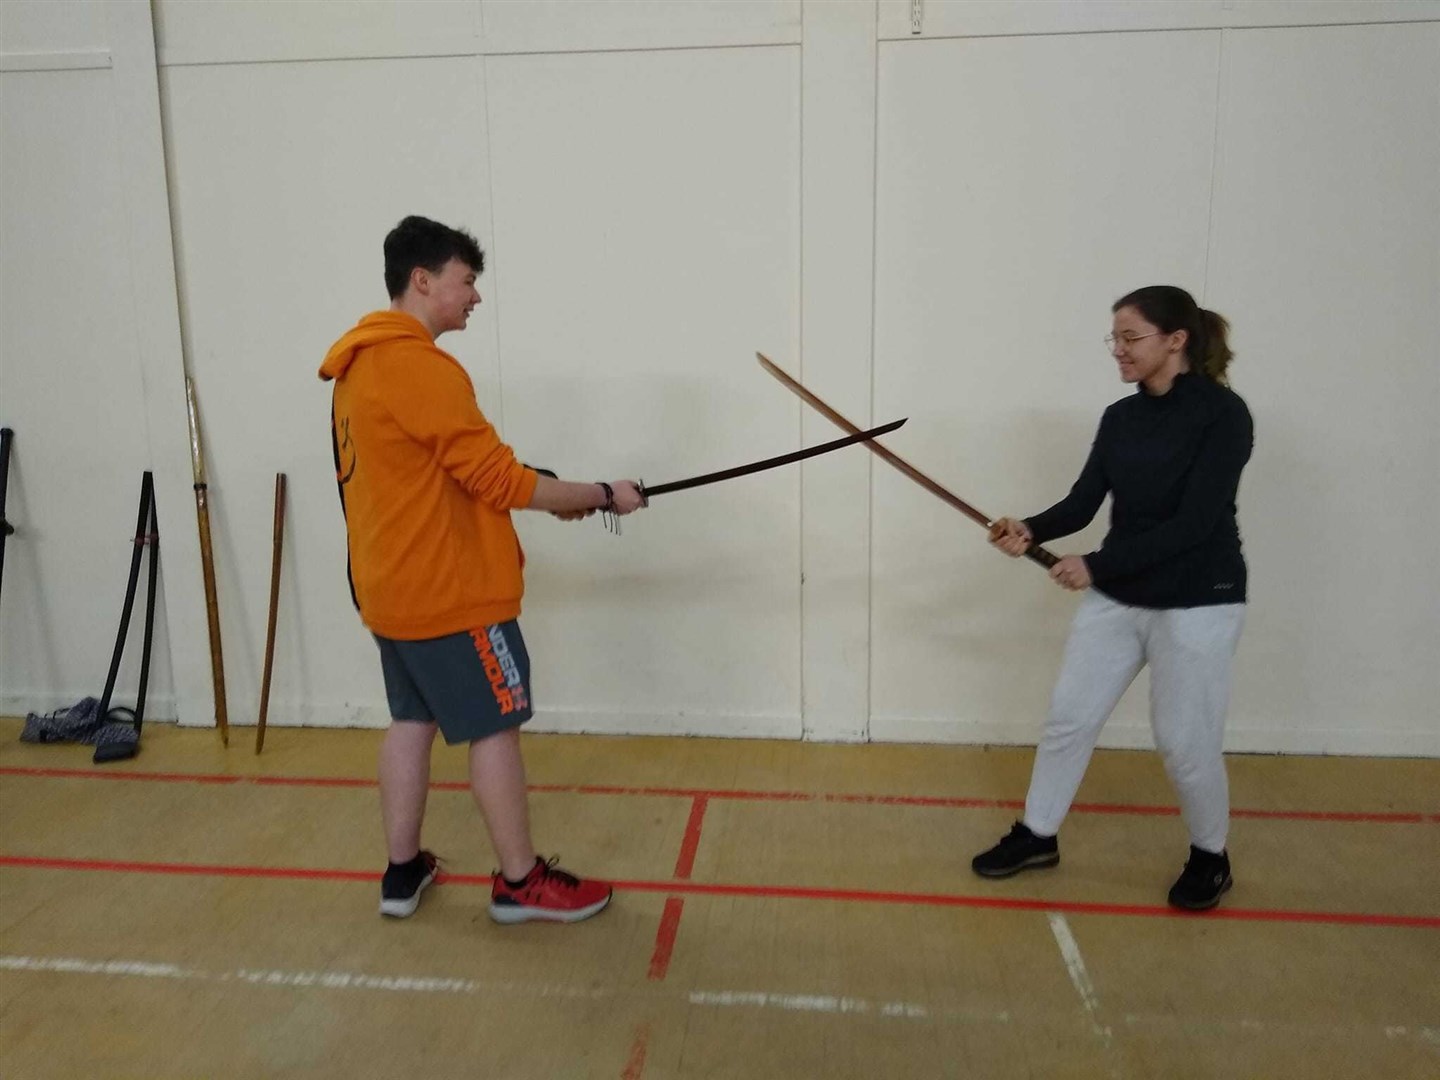 Participants on the one-day historical fencing course which was held on Dingwall. Photo: Ali Cameron